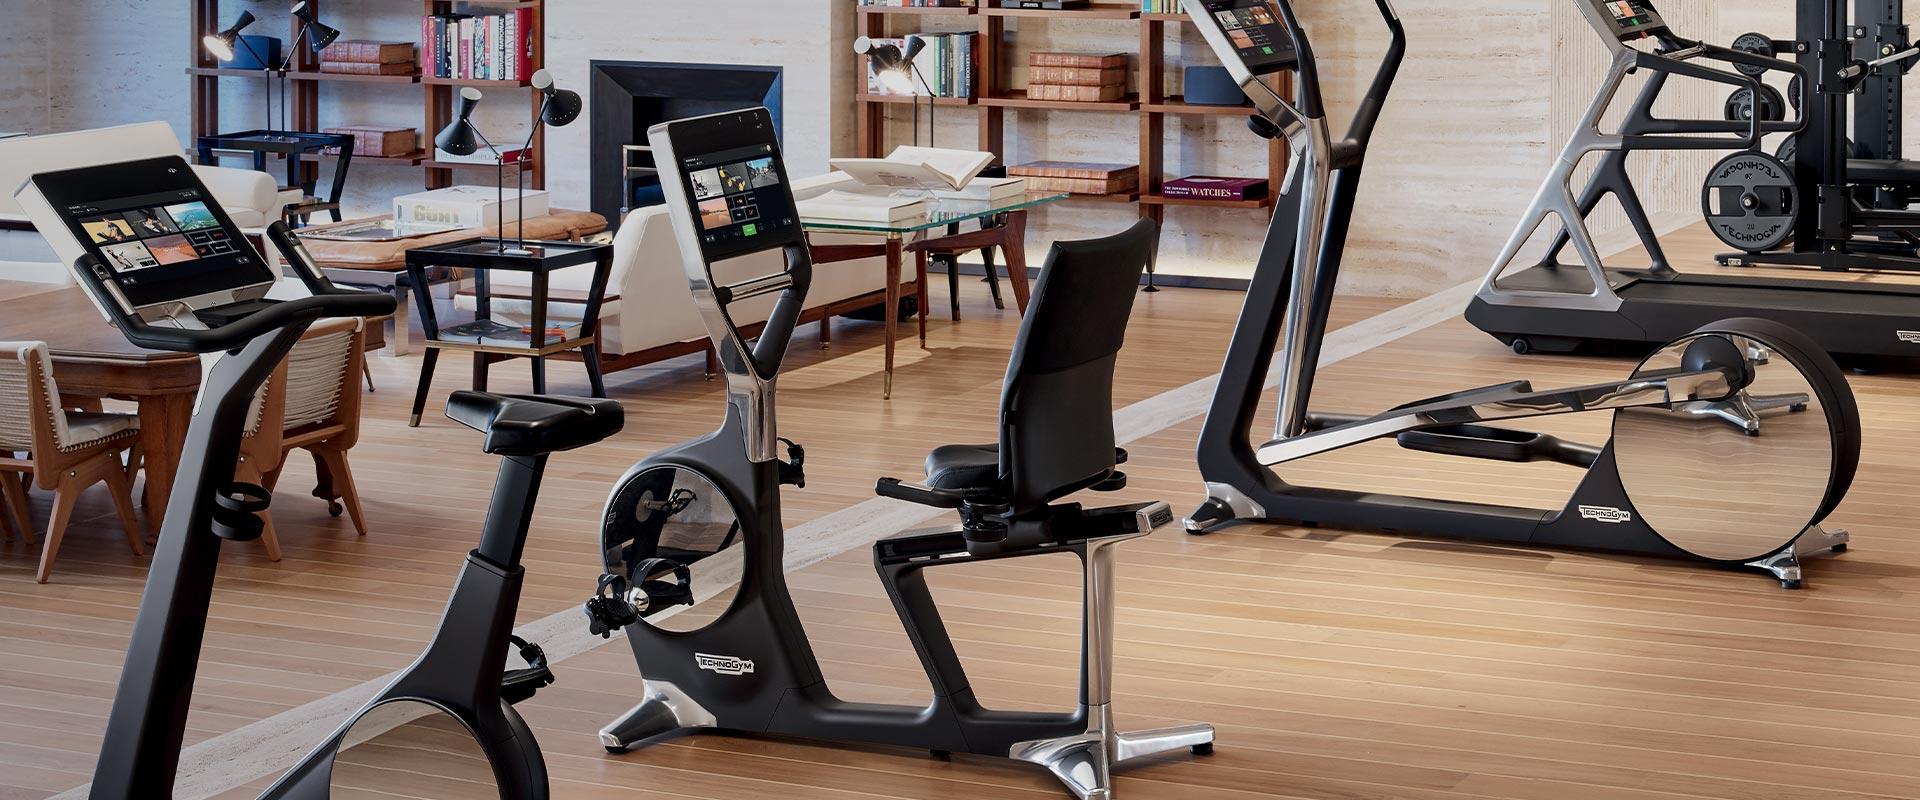 Wellness Holding offers a maximum of 10,000,000 ordinary shares of Technogym S.p.A. Through an accelerated bookbuilding procedure reserved to institutional investors